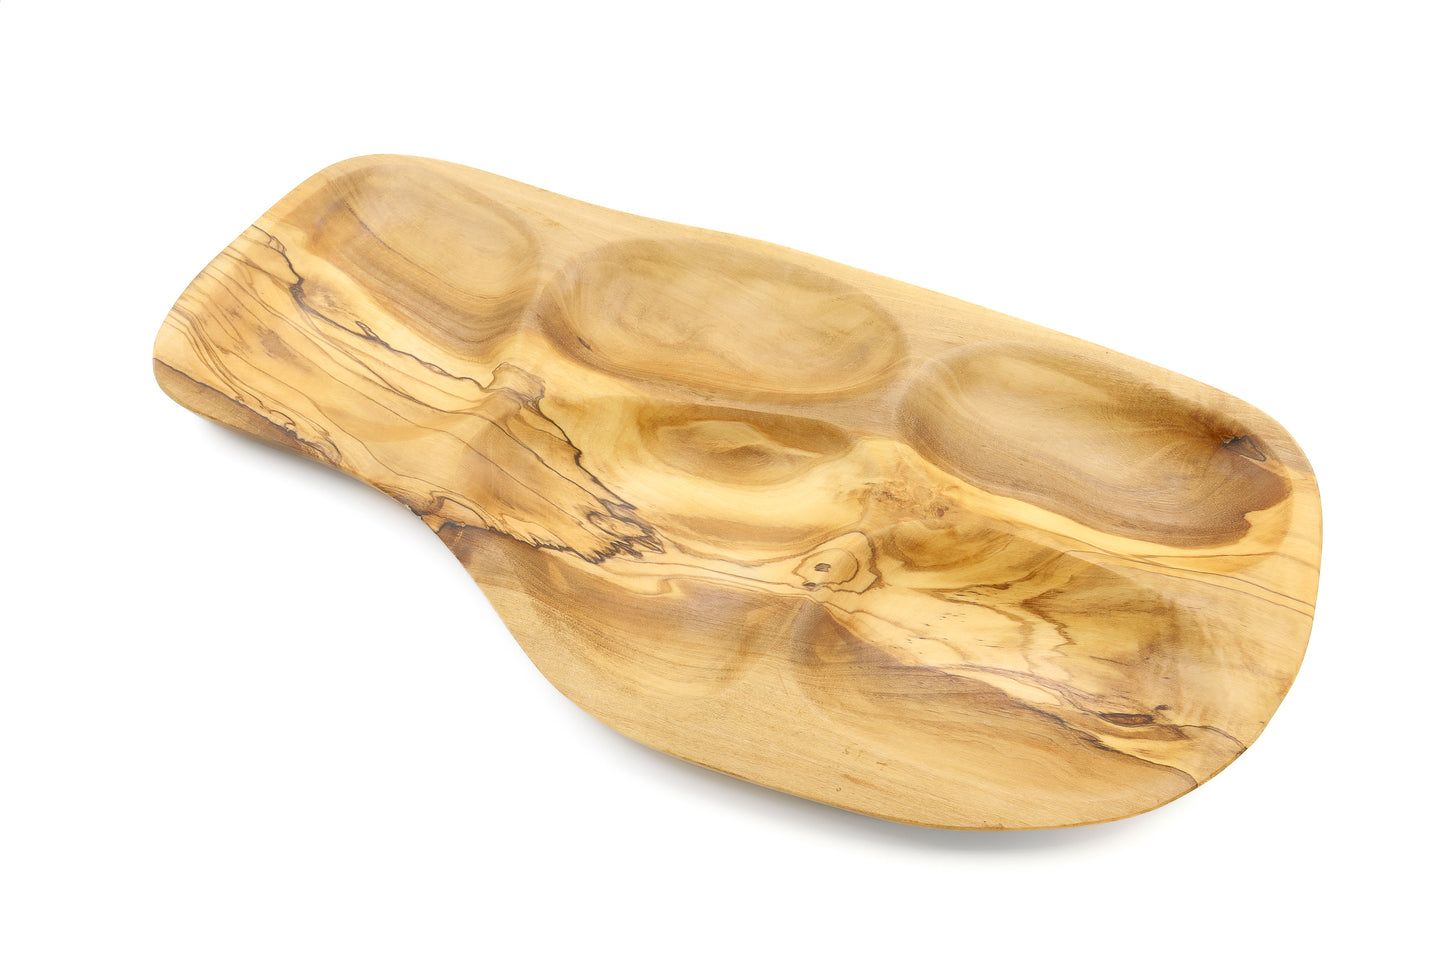 Olive wood tray for creative and unique appetizer displays